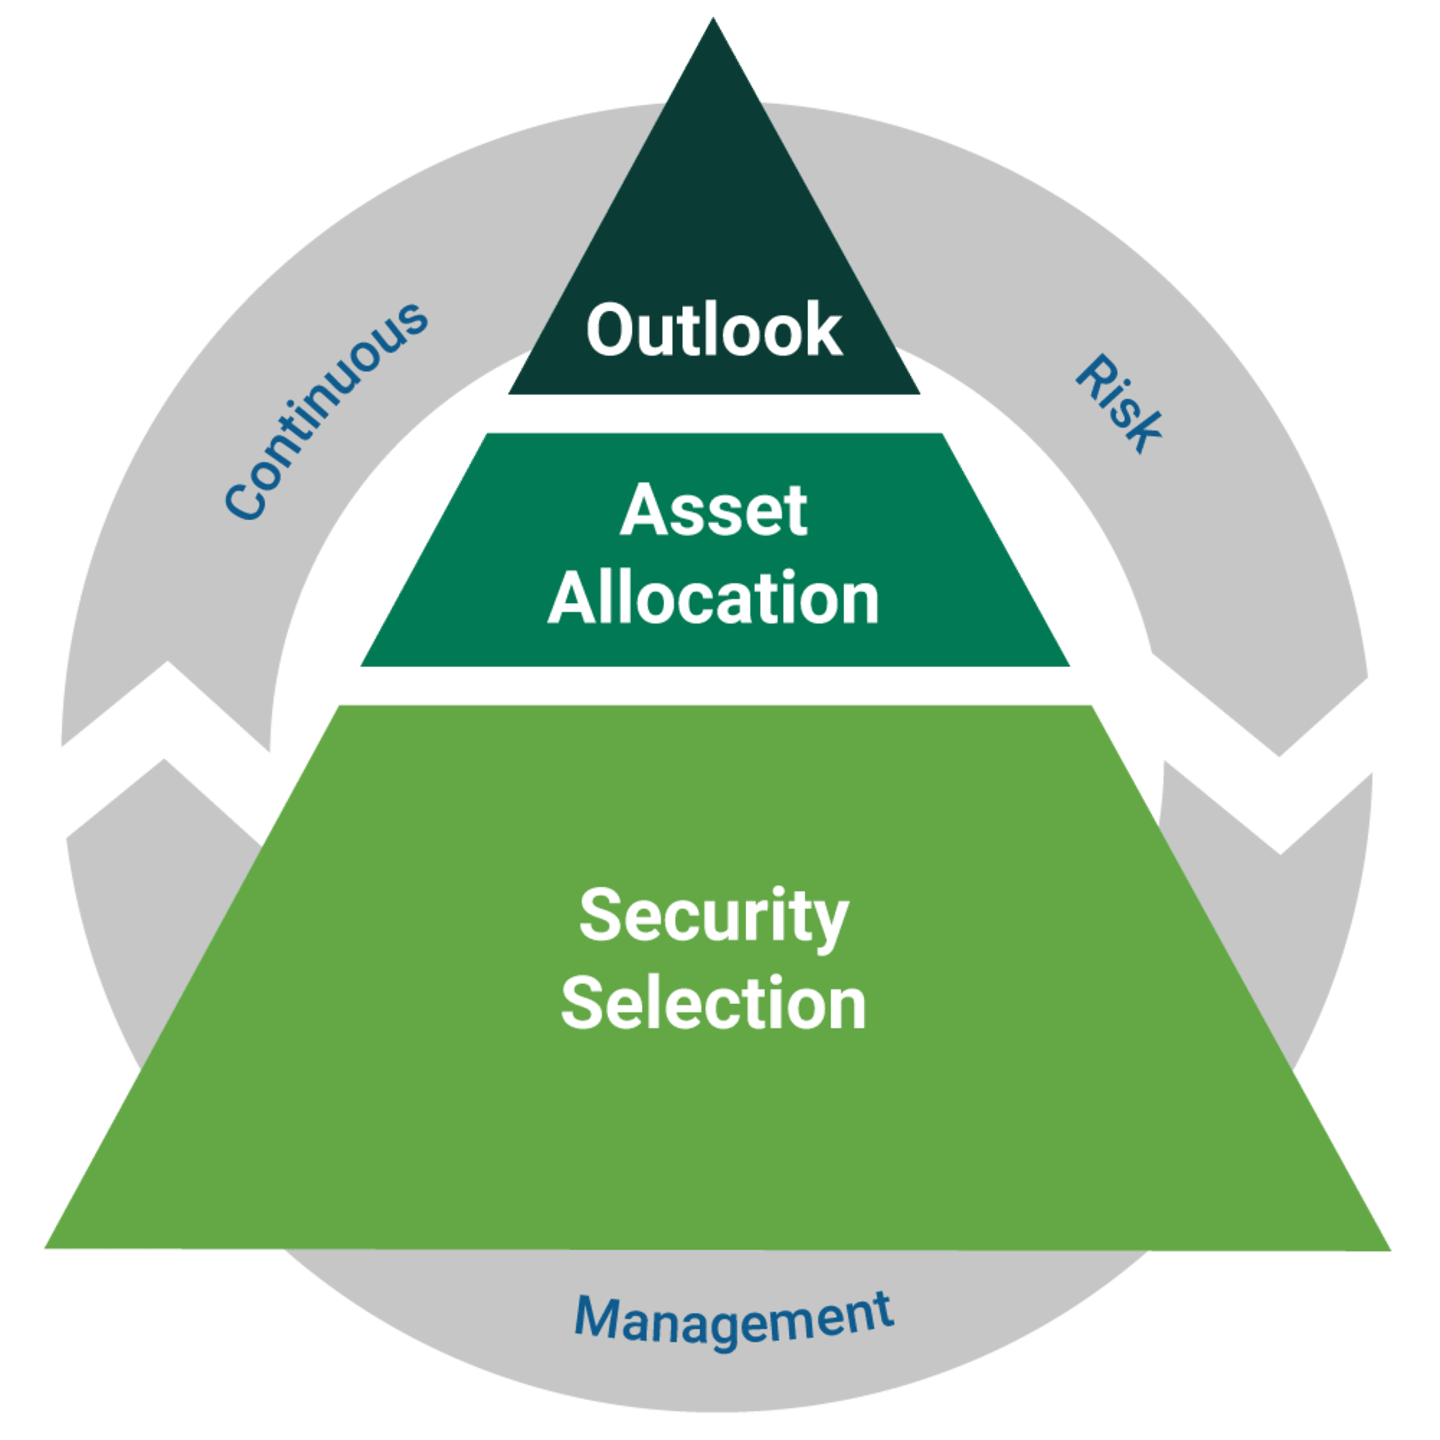 Continuous Risk Management circles around Outlook, Asset Allocation, and Security Selection. 